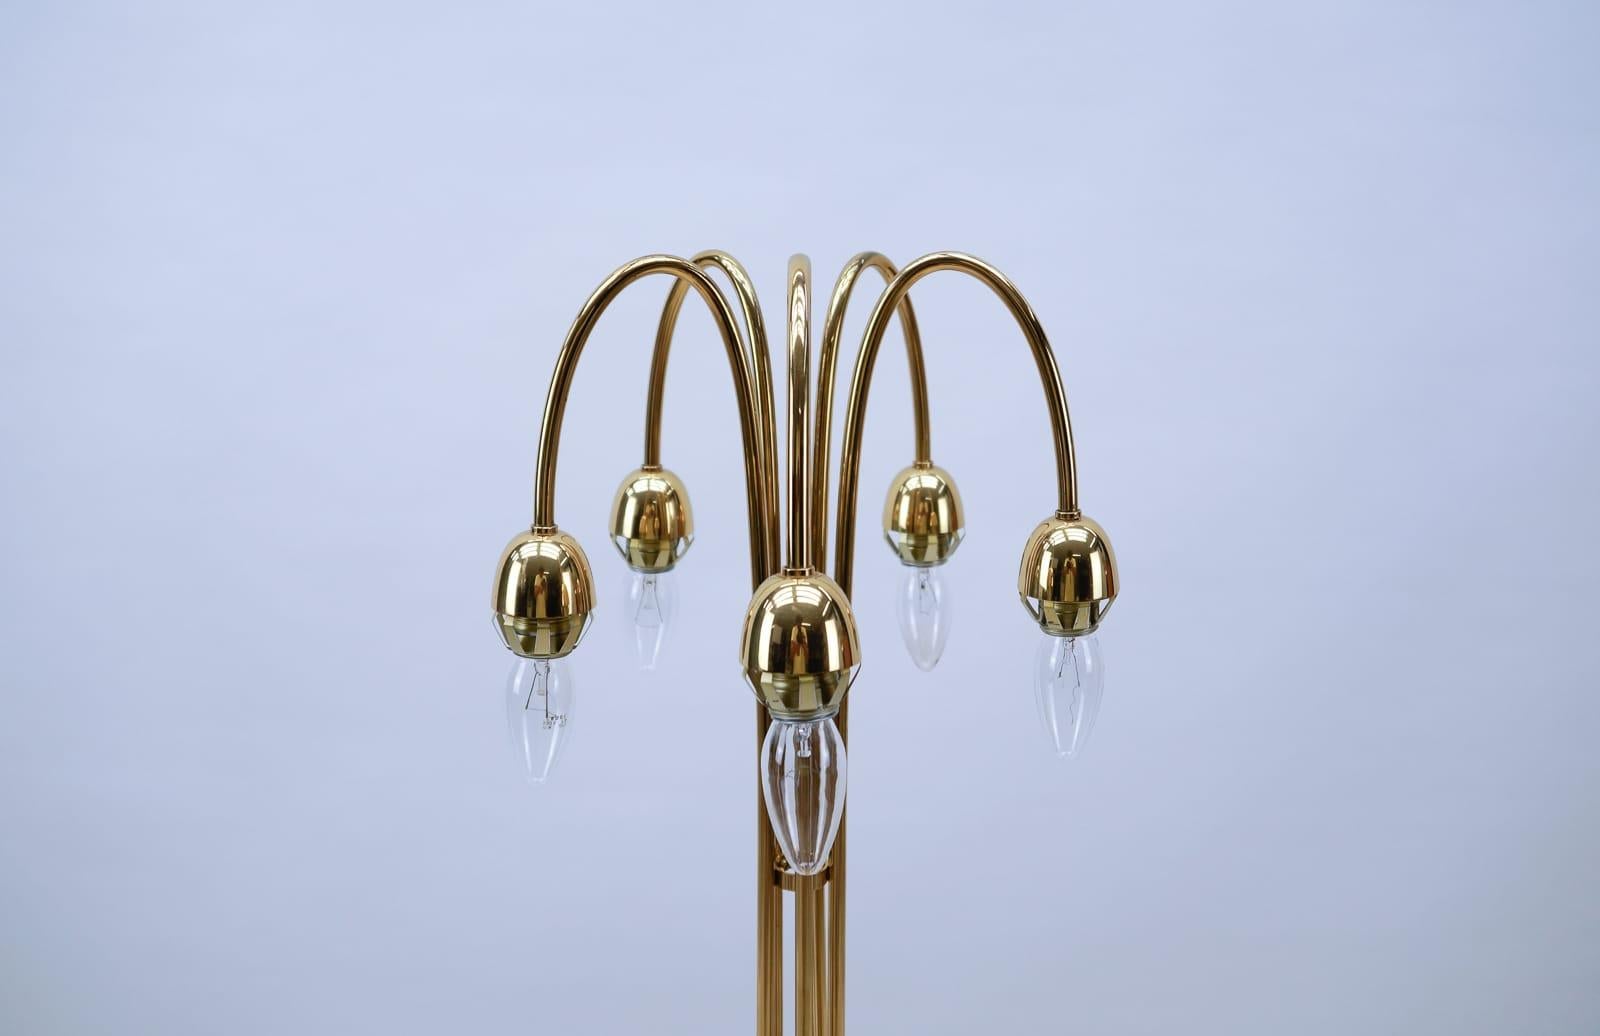 Very Rare Mid-Century Modern Floor Lamp with Five Glass Shades, 1950s Italy For Sale 2